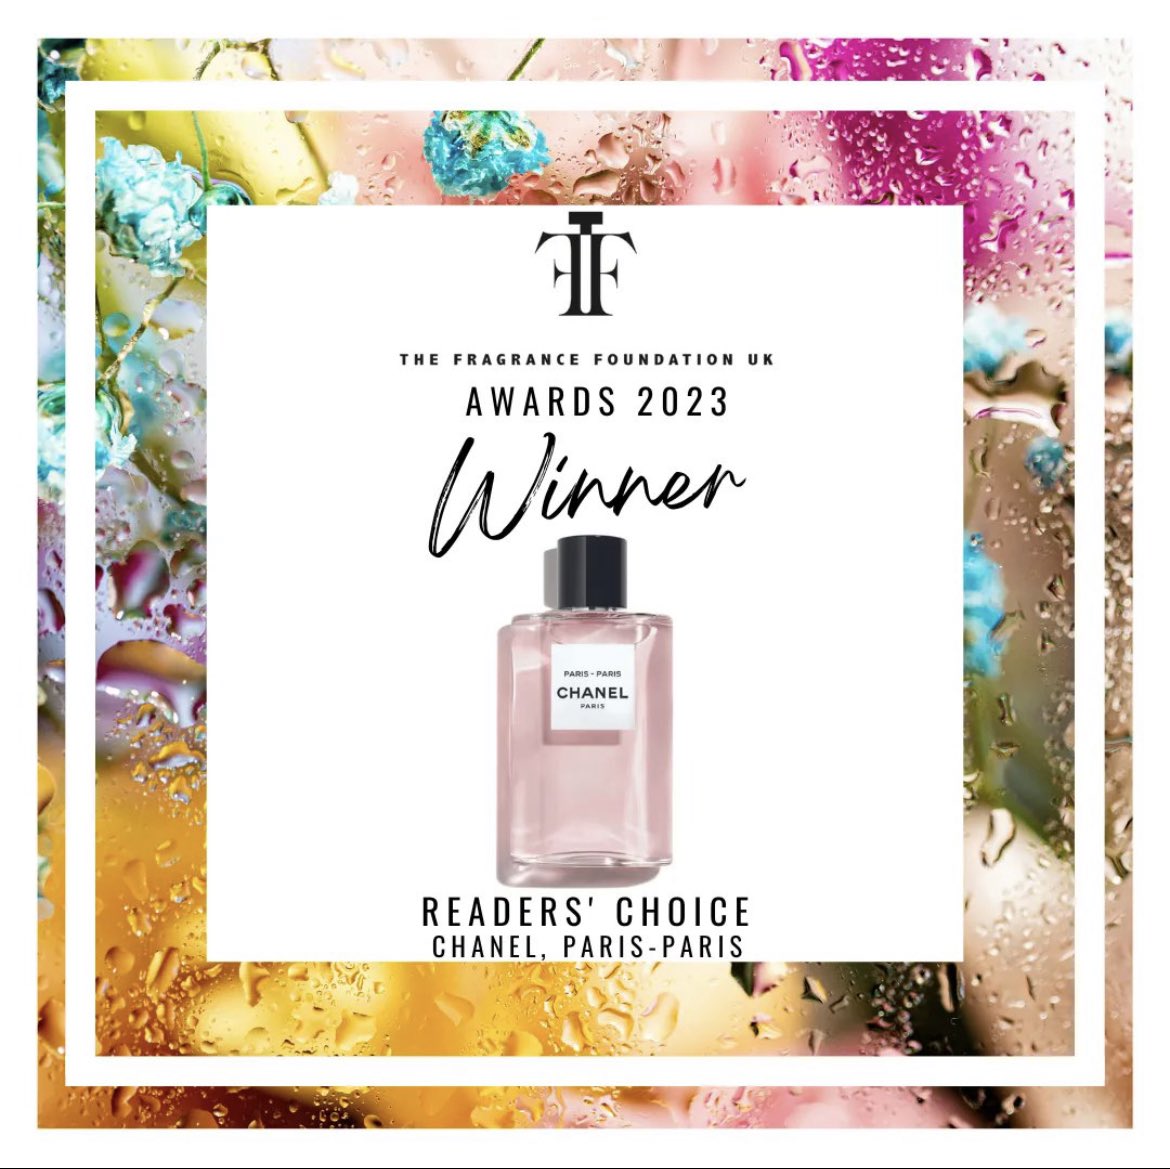 Huge congratulations to all of the #TFFAwards2023 winners announced last night 🍾🥂Especially readers choice winner CHANEL Paris-Paris 👏🏼👏🏼 #winner #readerschoice #fragrance #fragrancelover #fragrancecelebration